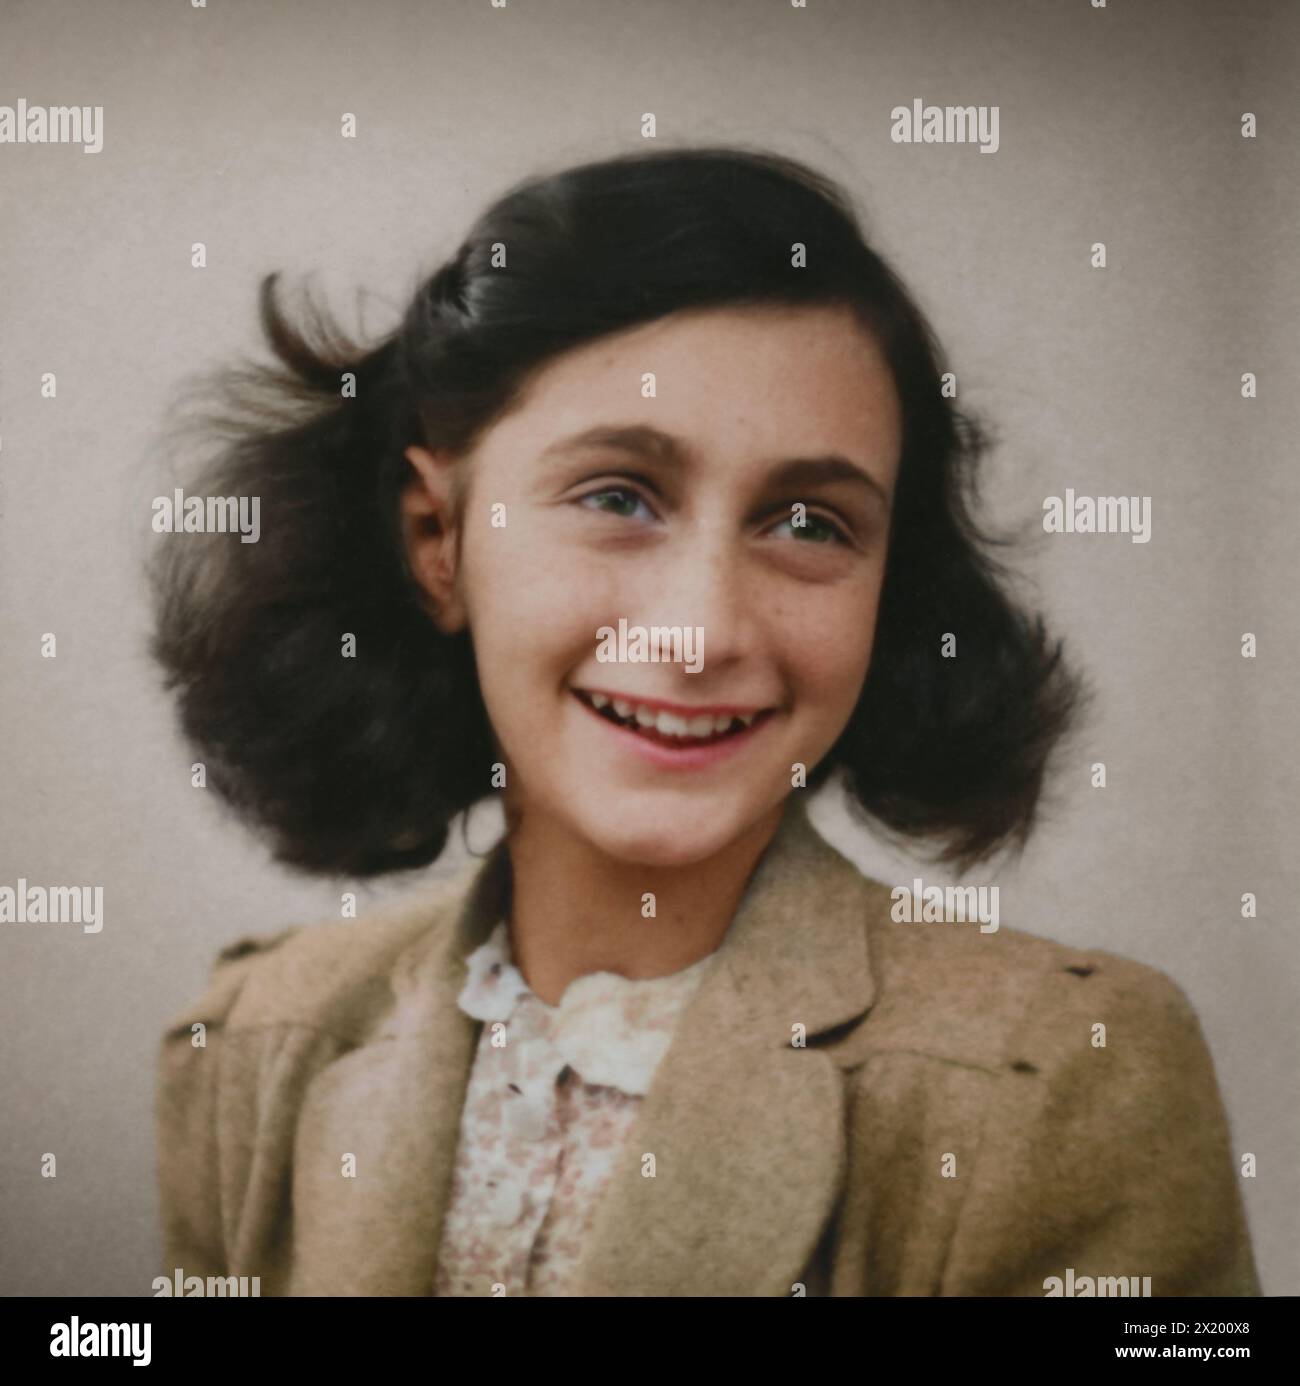 Passport photo of Anne Frank from a photo album, age 13, taken at Polyfoto in Amsterdam in May 1942. Material: Photo paper. Stock Photo